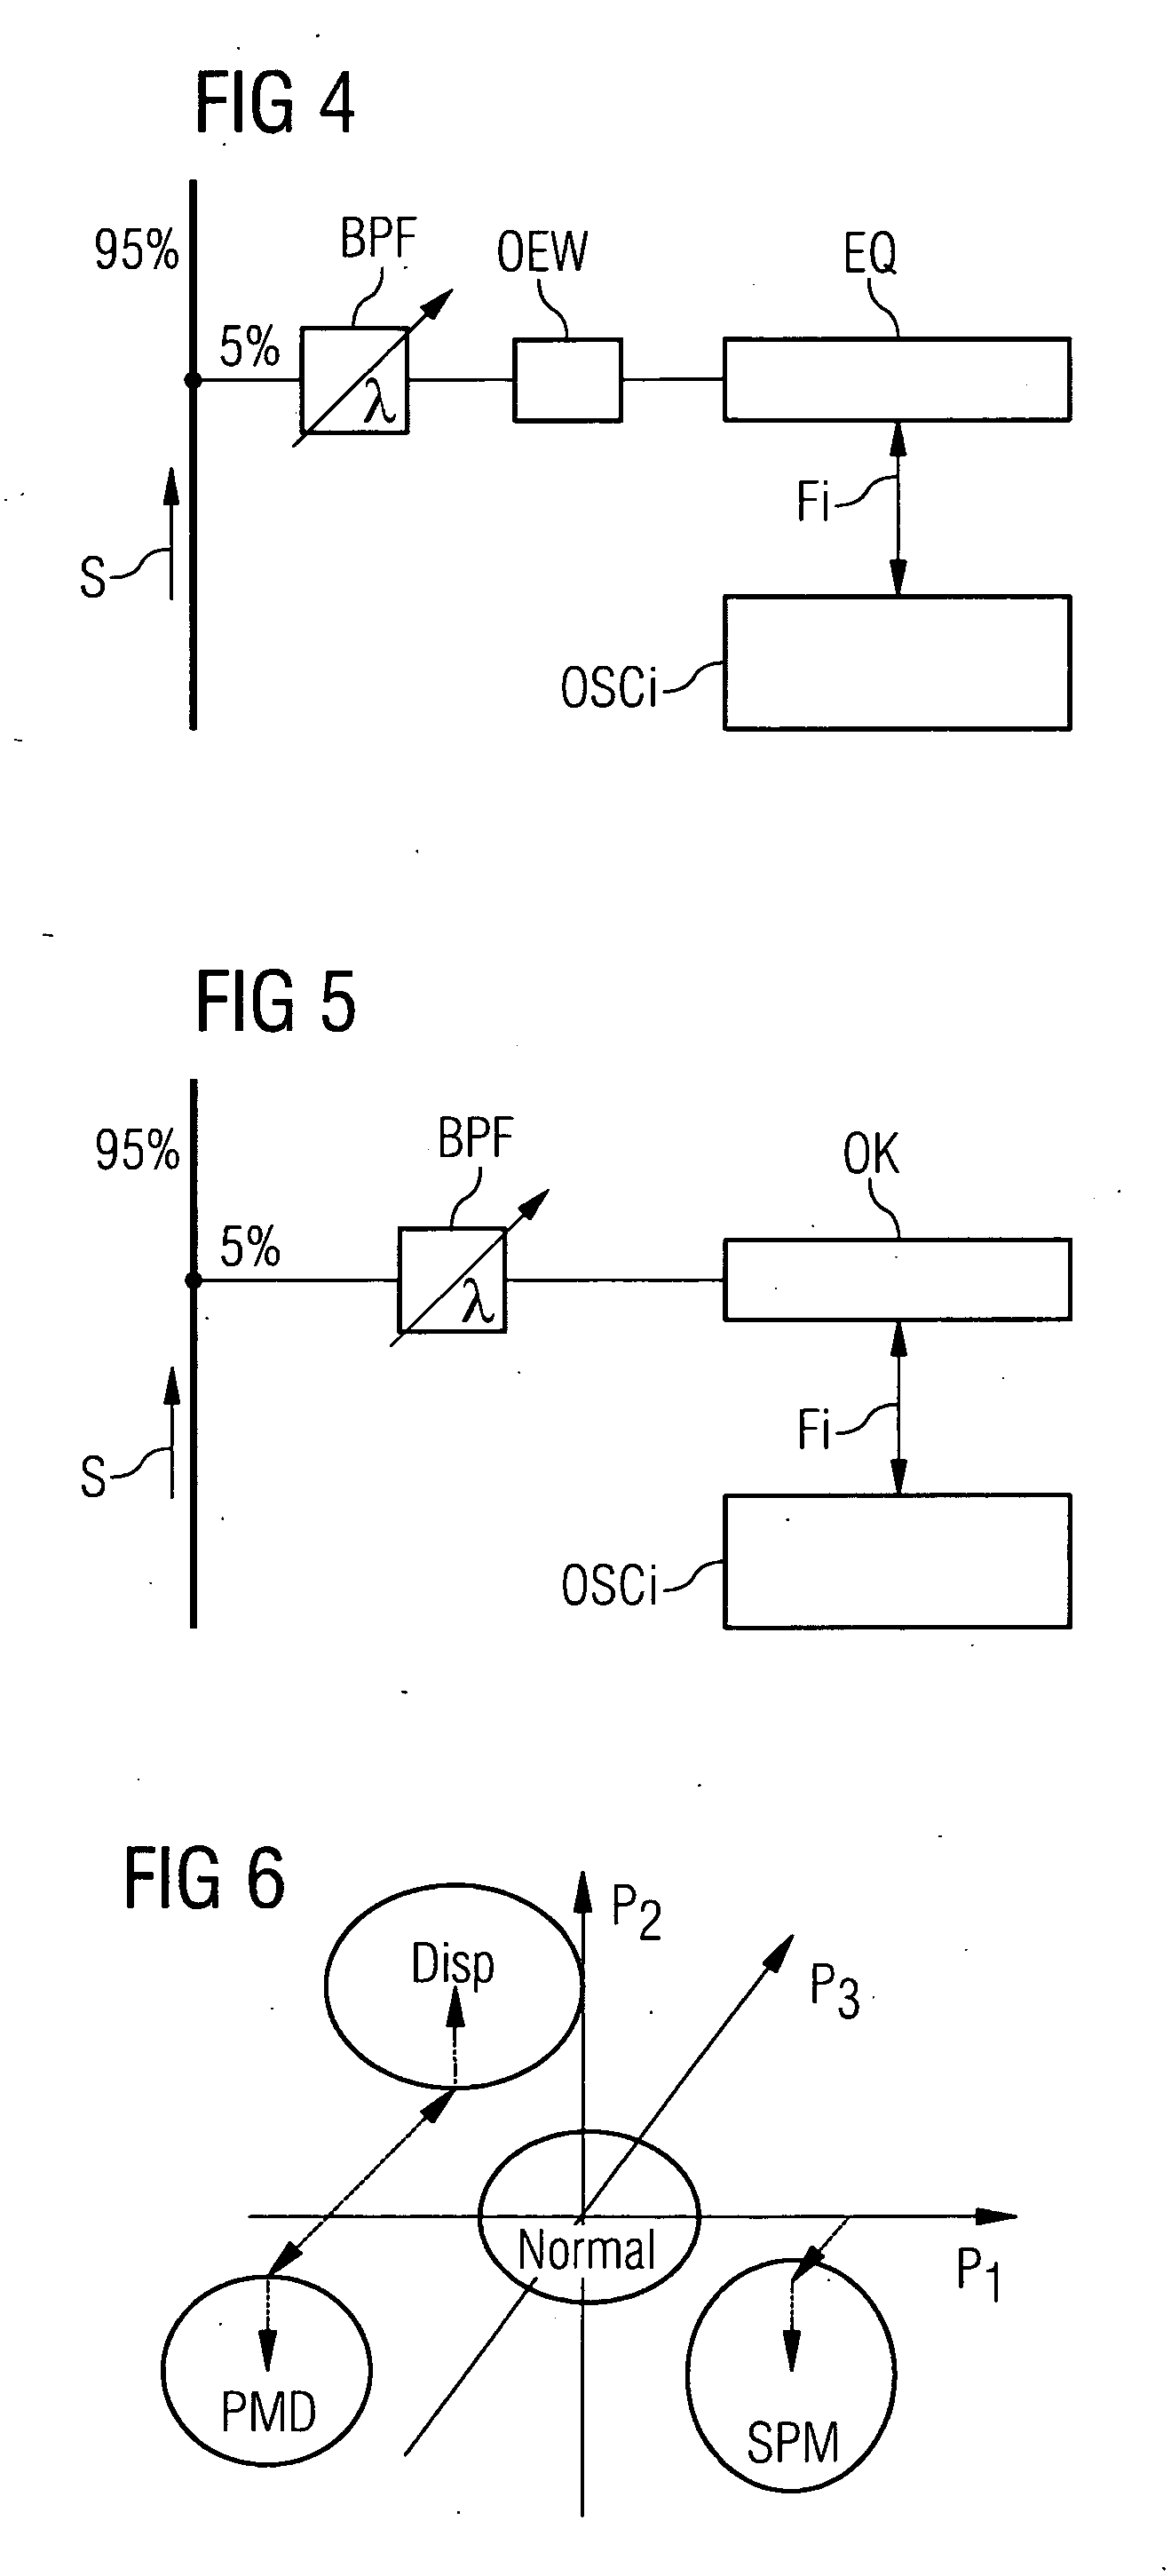 Method and arrangement for determining signal degradations in the presence of signal distortions